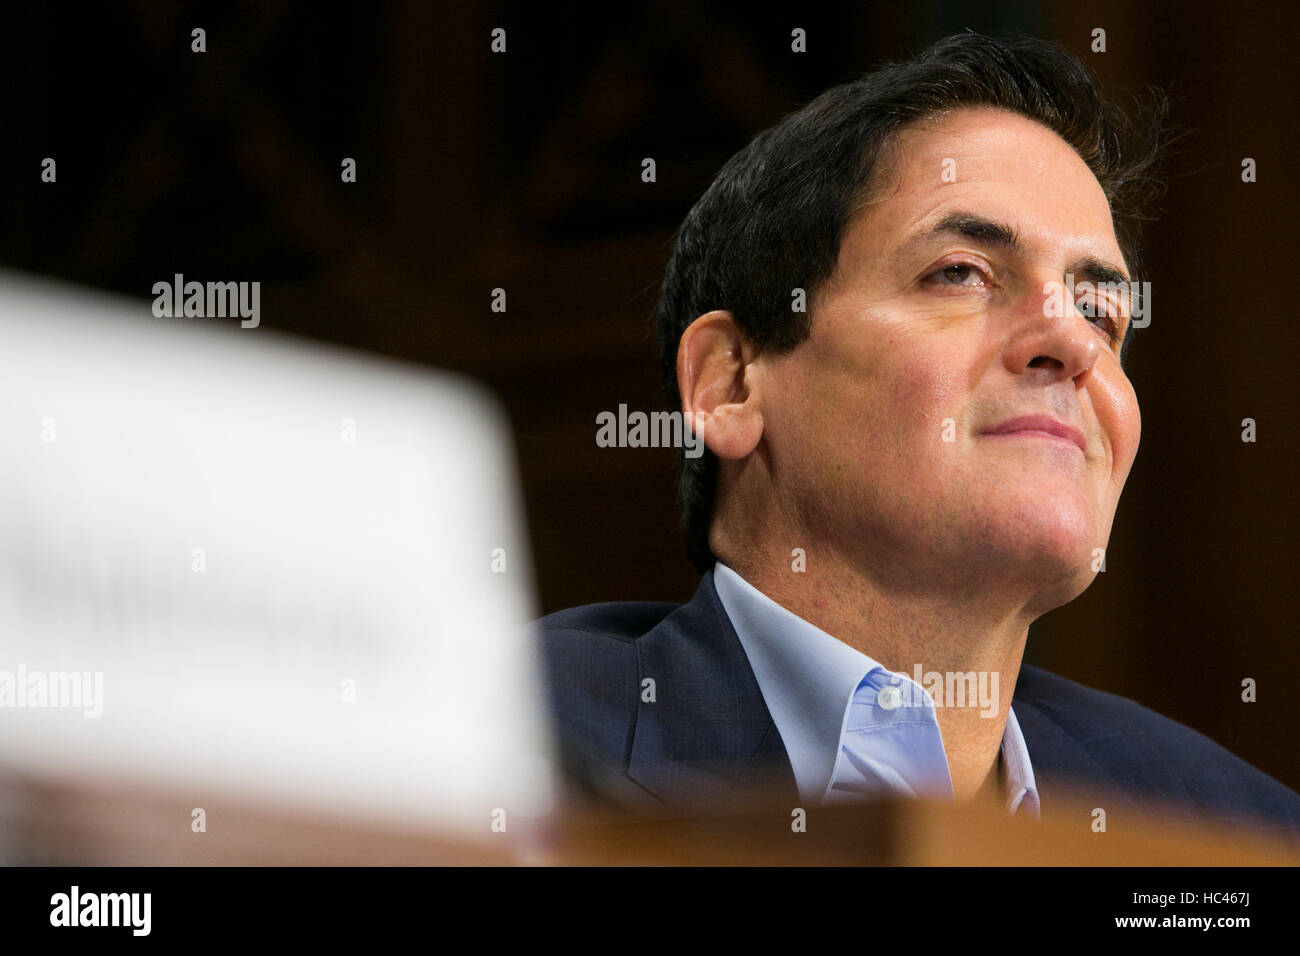 Washington DC, USA. 7th December, 2016. Mark Cuban, Chairman, AXS TV, testifies before the United States Senate Committee on the Judiciary Subcommittee on Antitrust, Competition Policy & Consumer Rights during a hearing on the pending AT&T and Time Warner merger in Washington, D.C. on December 7, 2016. Credit:  Kristoffer Tripplaar/Alamy Live News Stock Photo